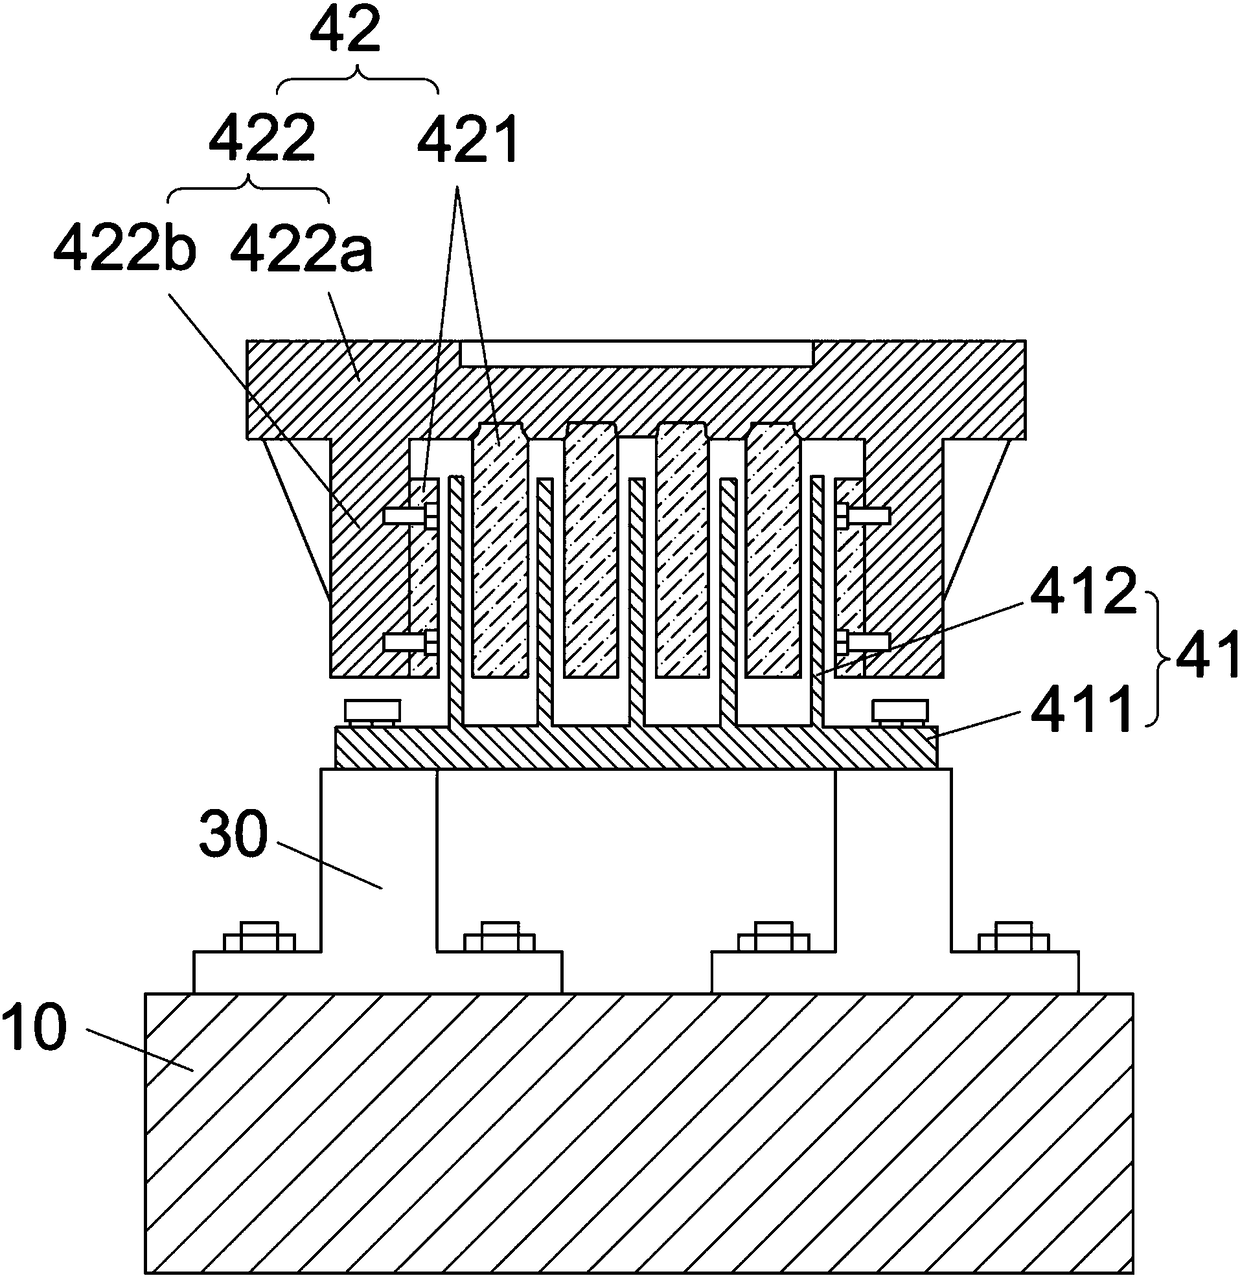 A linear eddy current braking device and a linear carrying device